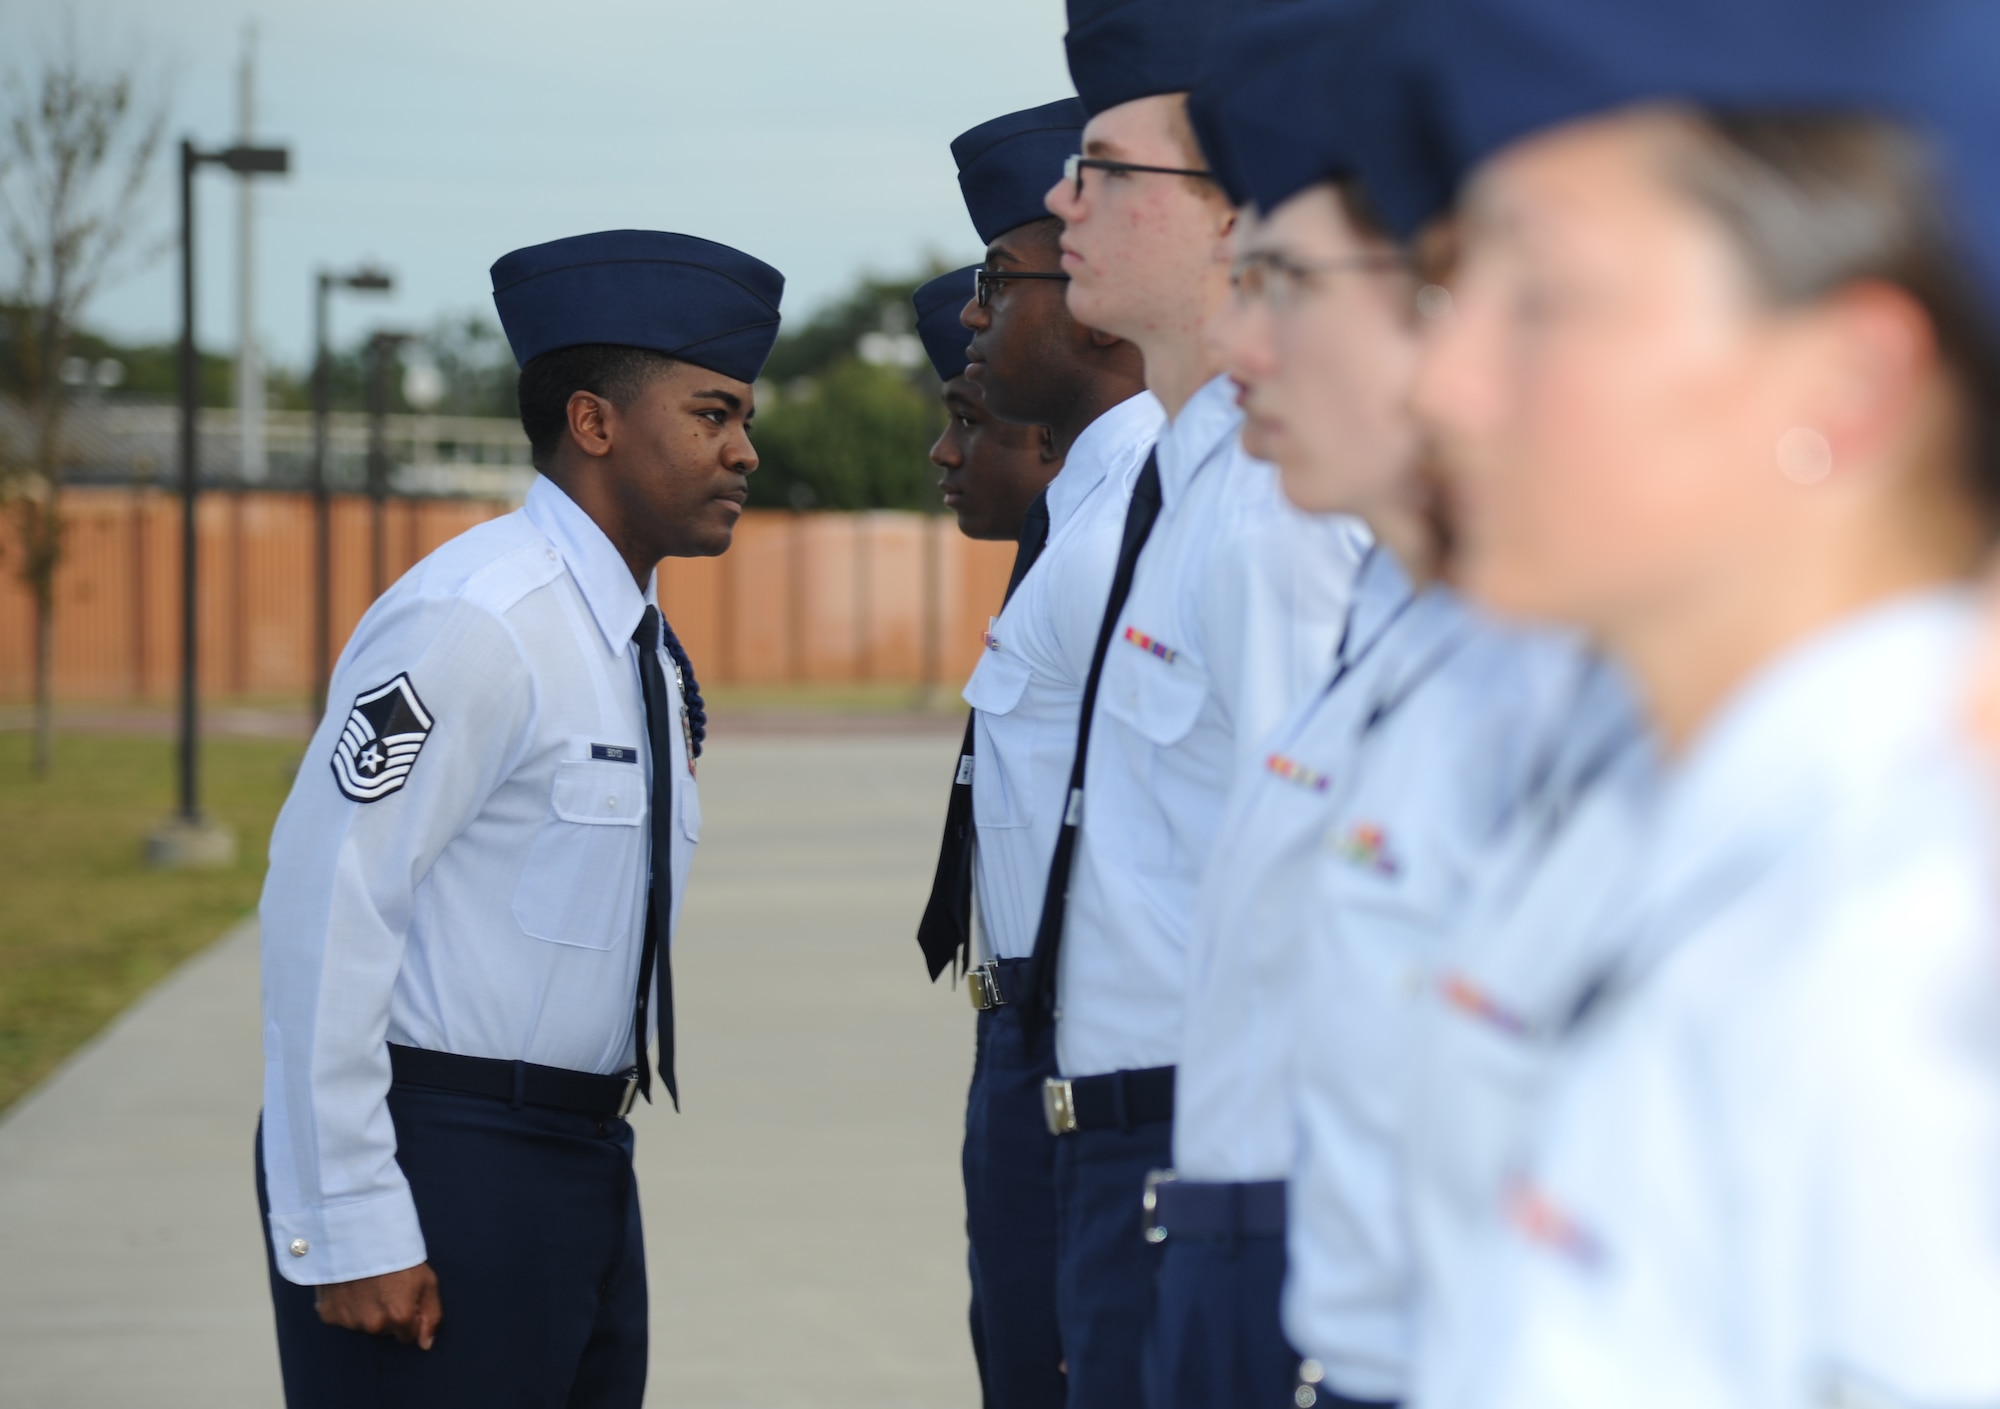 Master Sgt. Terrance Boyd, 334th Training Squadron flight chief military training flight, conducts an open ranks inspection on Airmen Nov. 18, 2013, at Avery Manor, Keesler Air Force Base, Miss.  Boyd was recently selected as the 2013 Air Education and Training Command junior enlisted category Lance P. Sijan award winner.  (U.S. Air Force photo by Kemberly Groue)